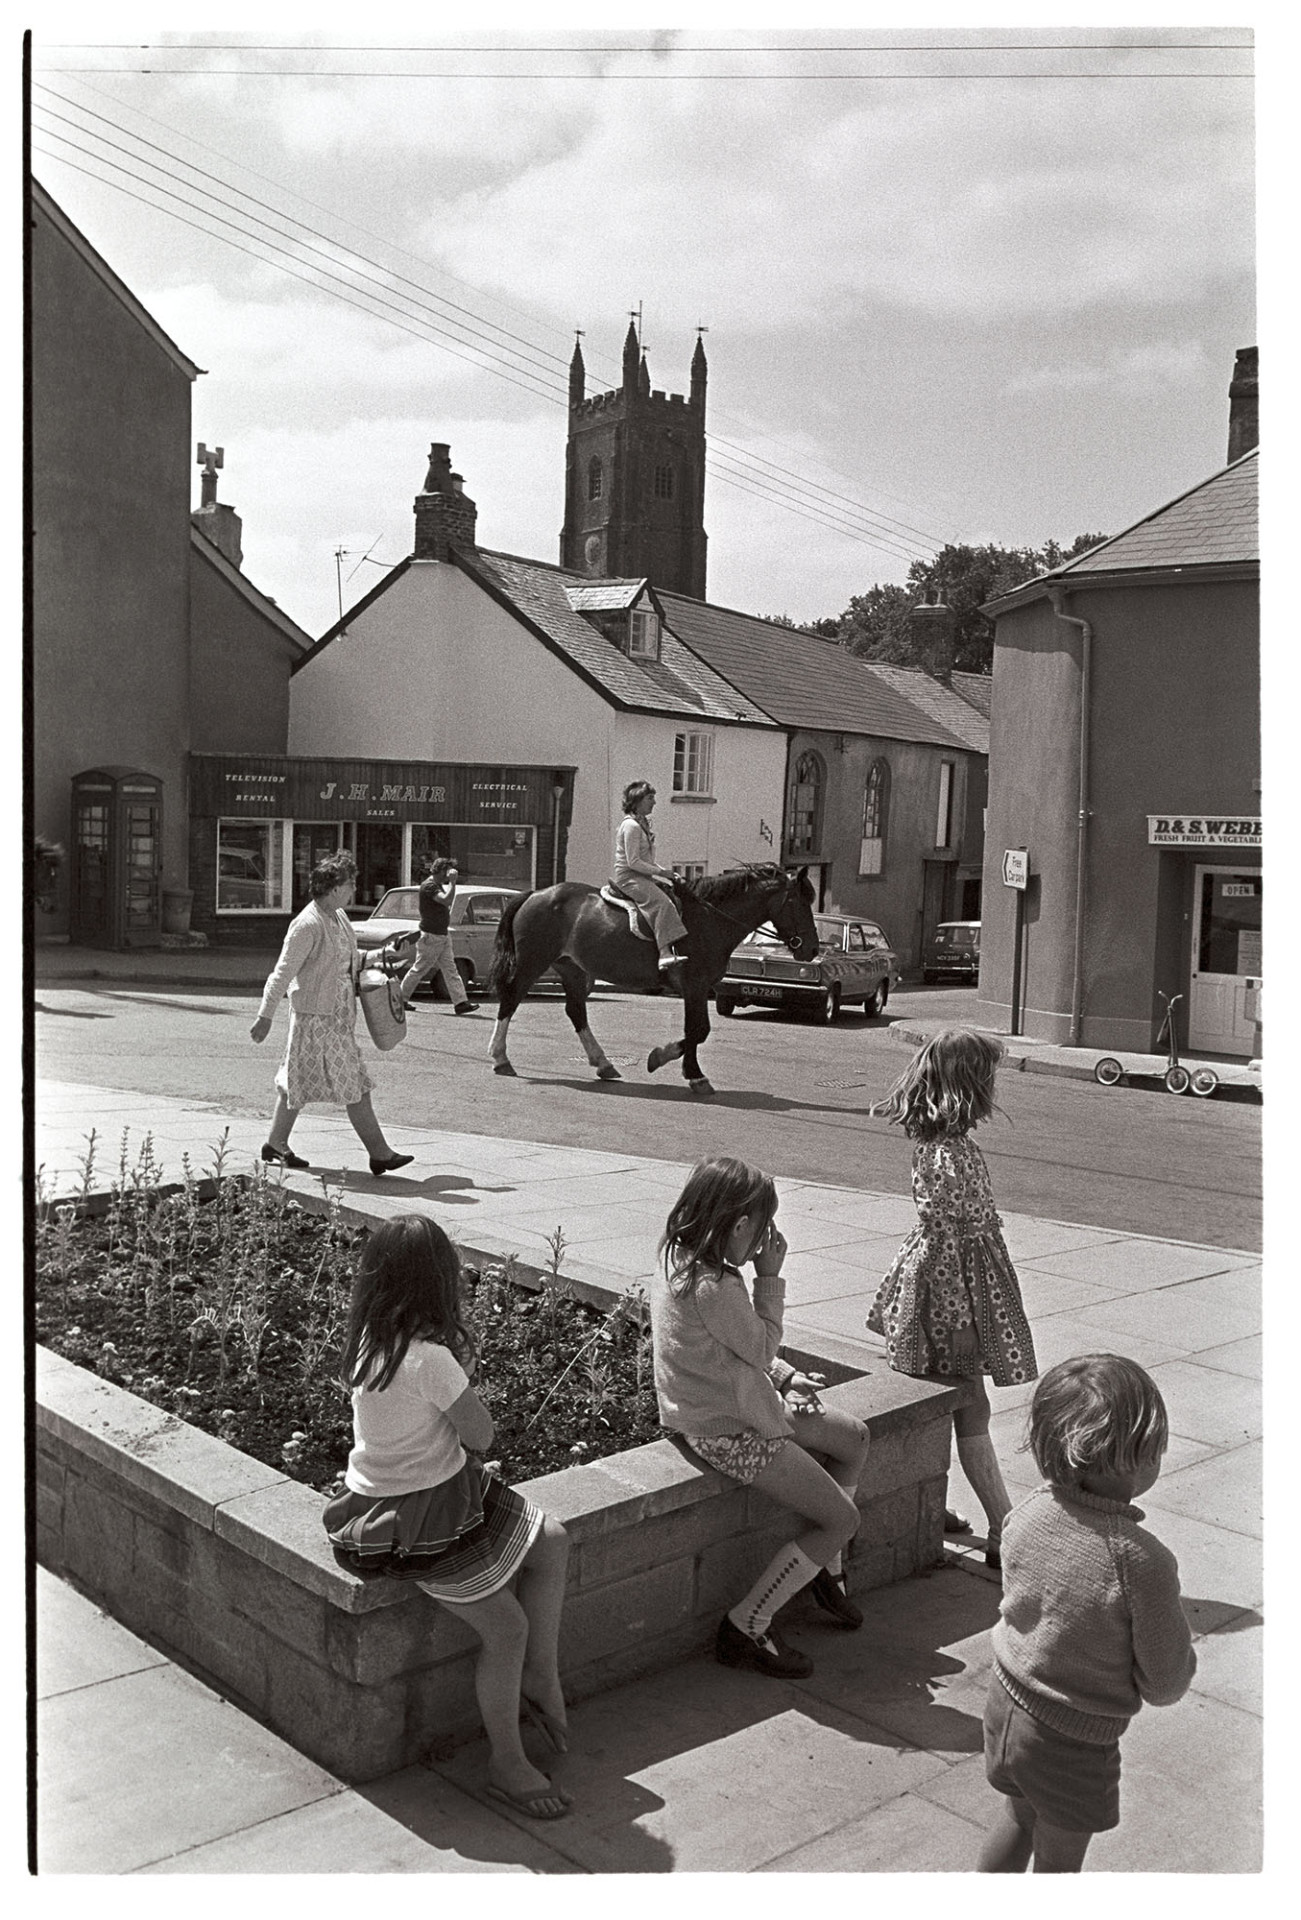 Children sitting in town.
[Children sitting on a raised flower bed in Chulmleigh town centre, as a woman rides past on horseback. The shop front of J H Mair, television rental and electrical service, and the church tower is visible in the background]